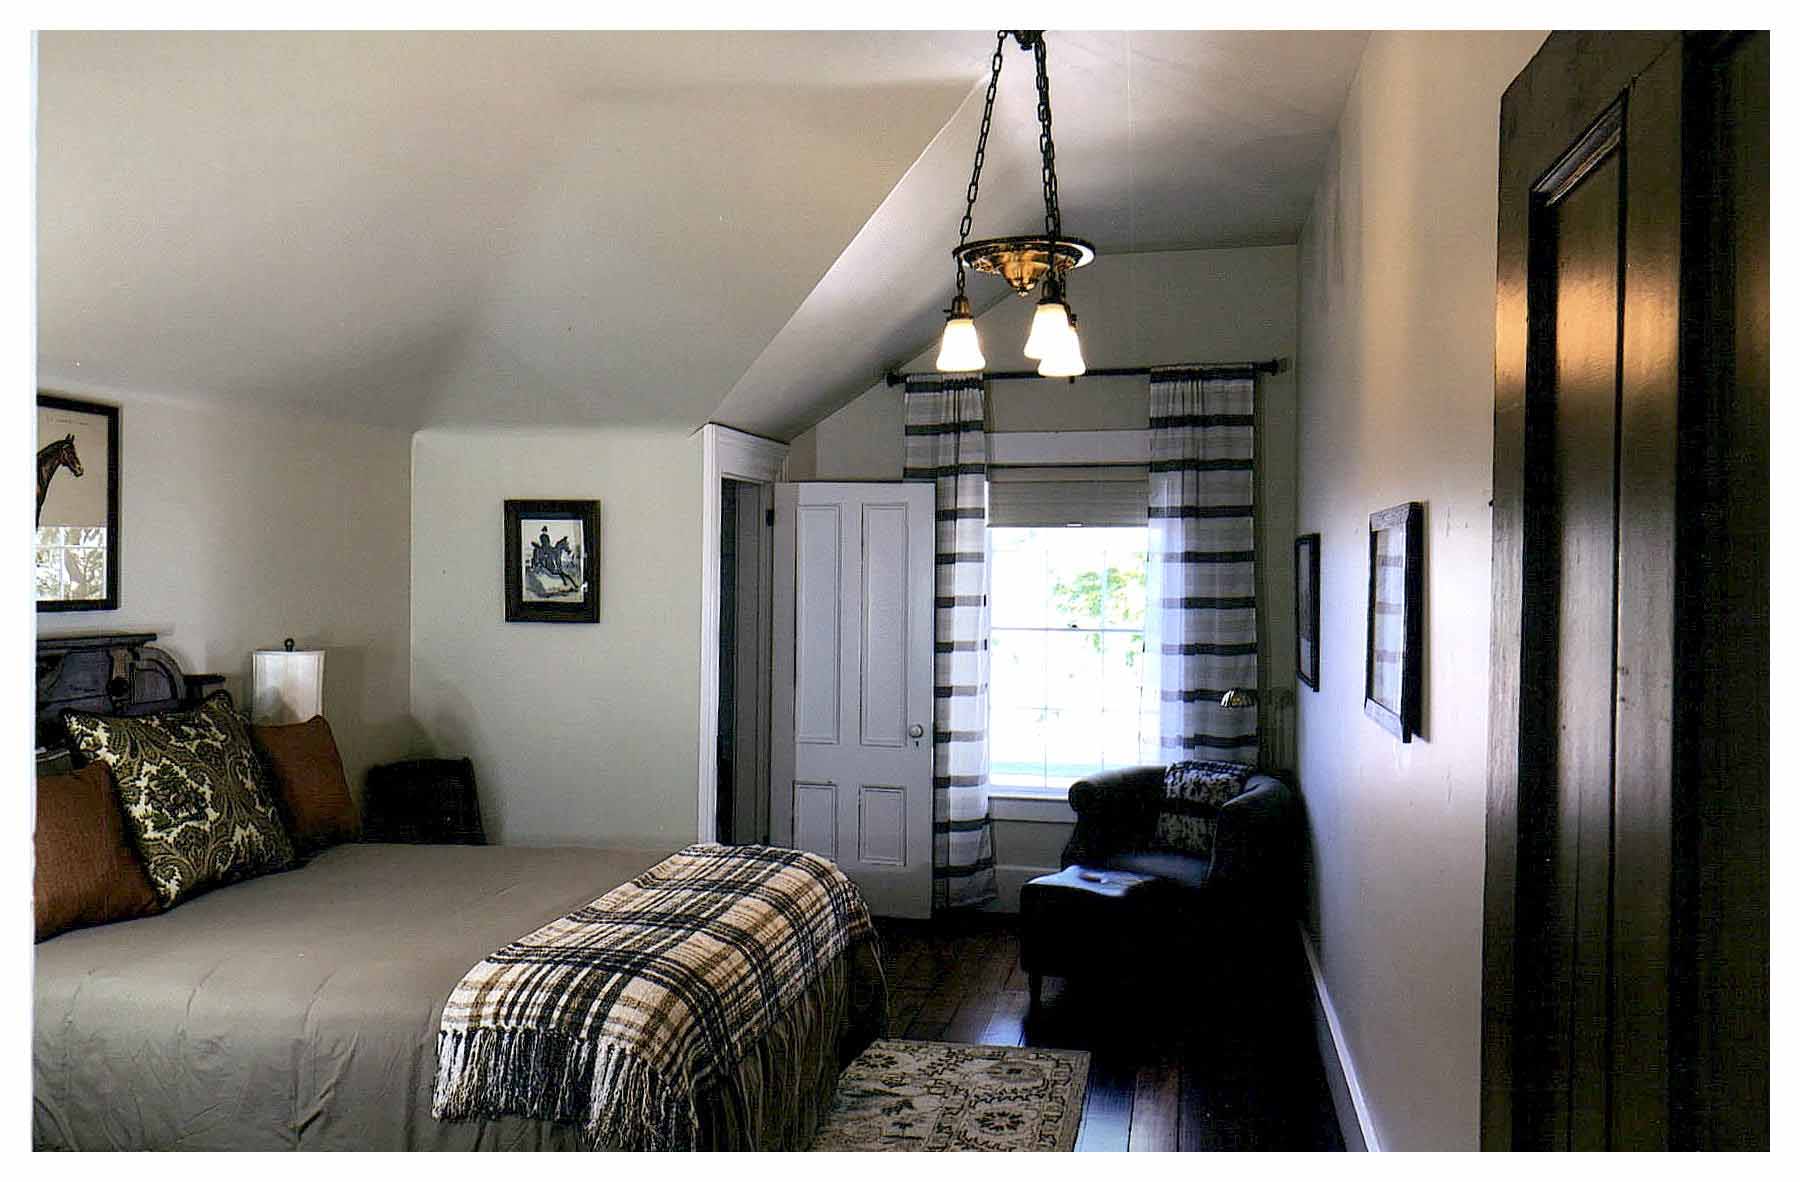 After: another bedroom with a sloped hipped ceiling at the corner closet. Walls are painted off-white.